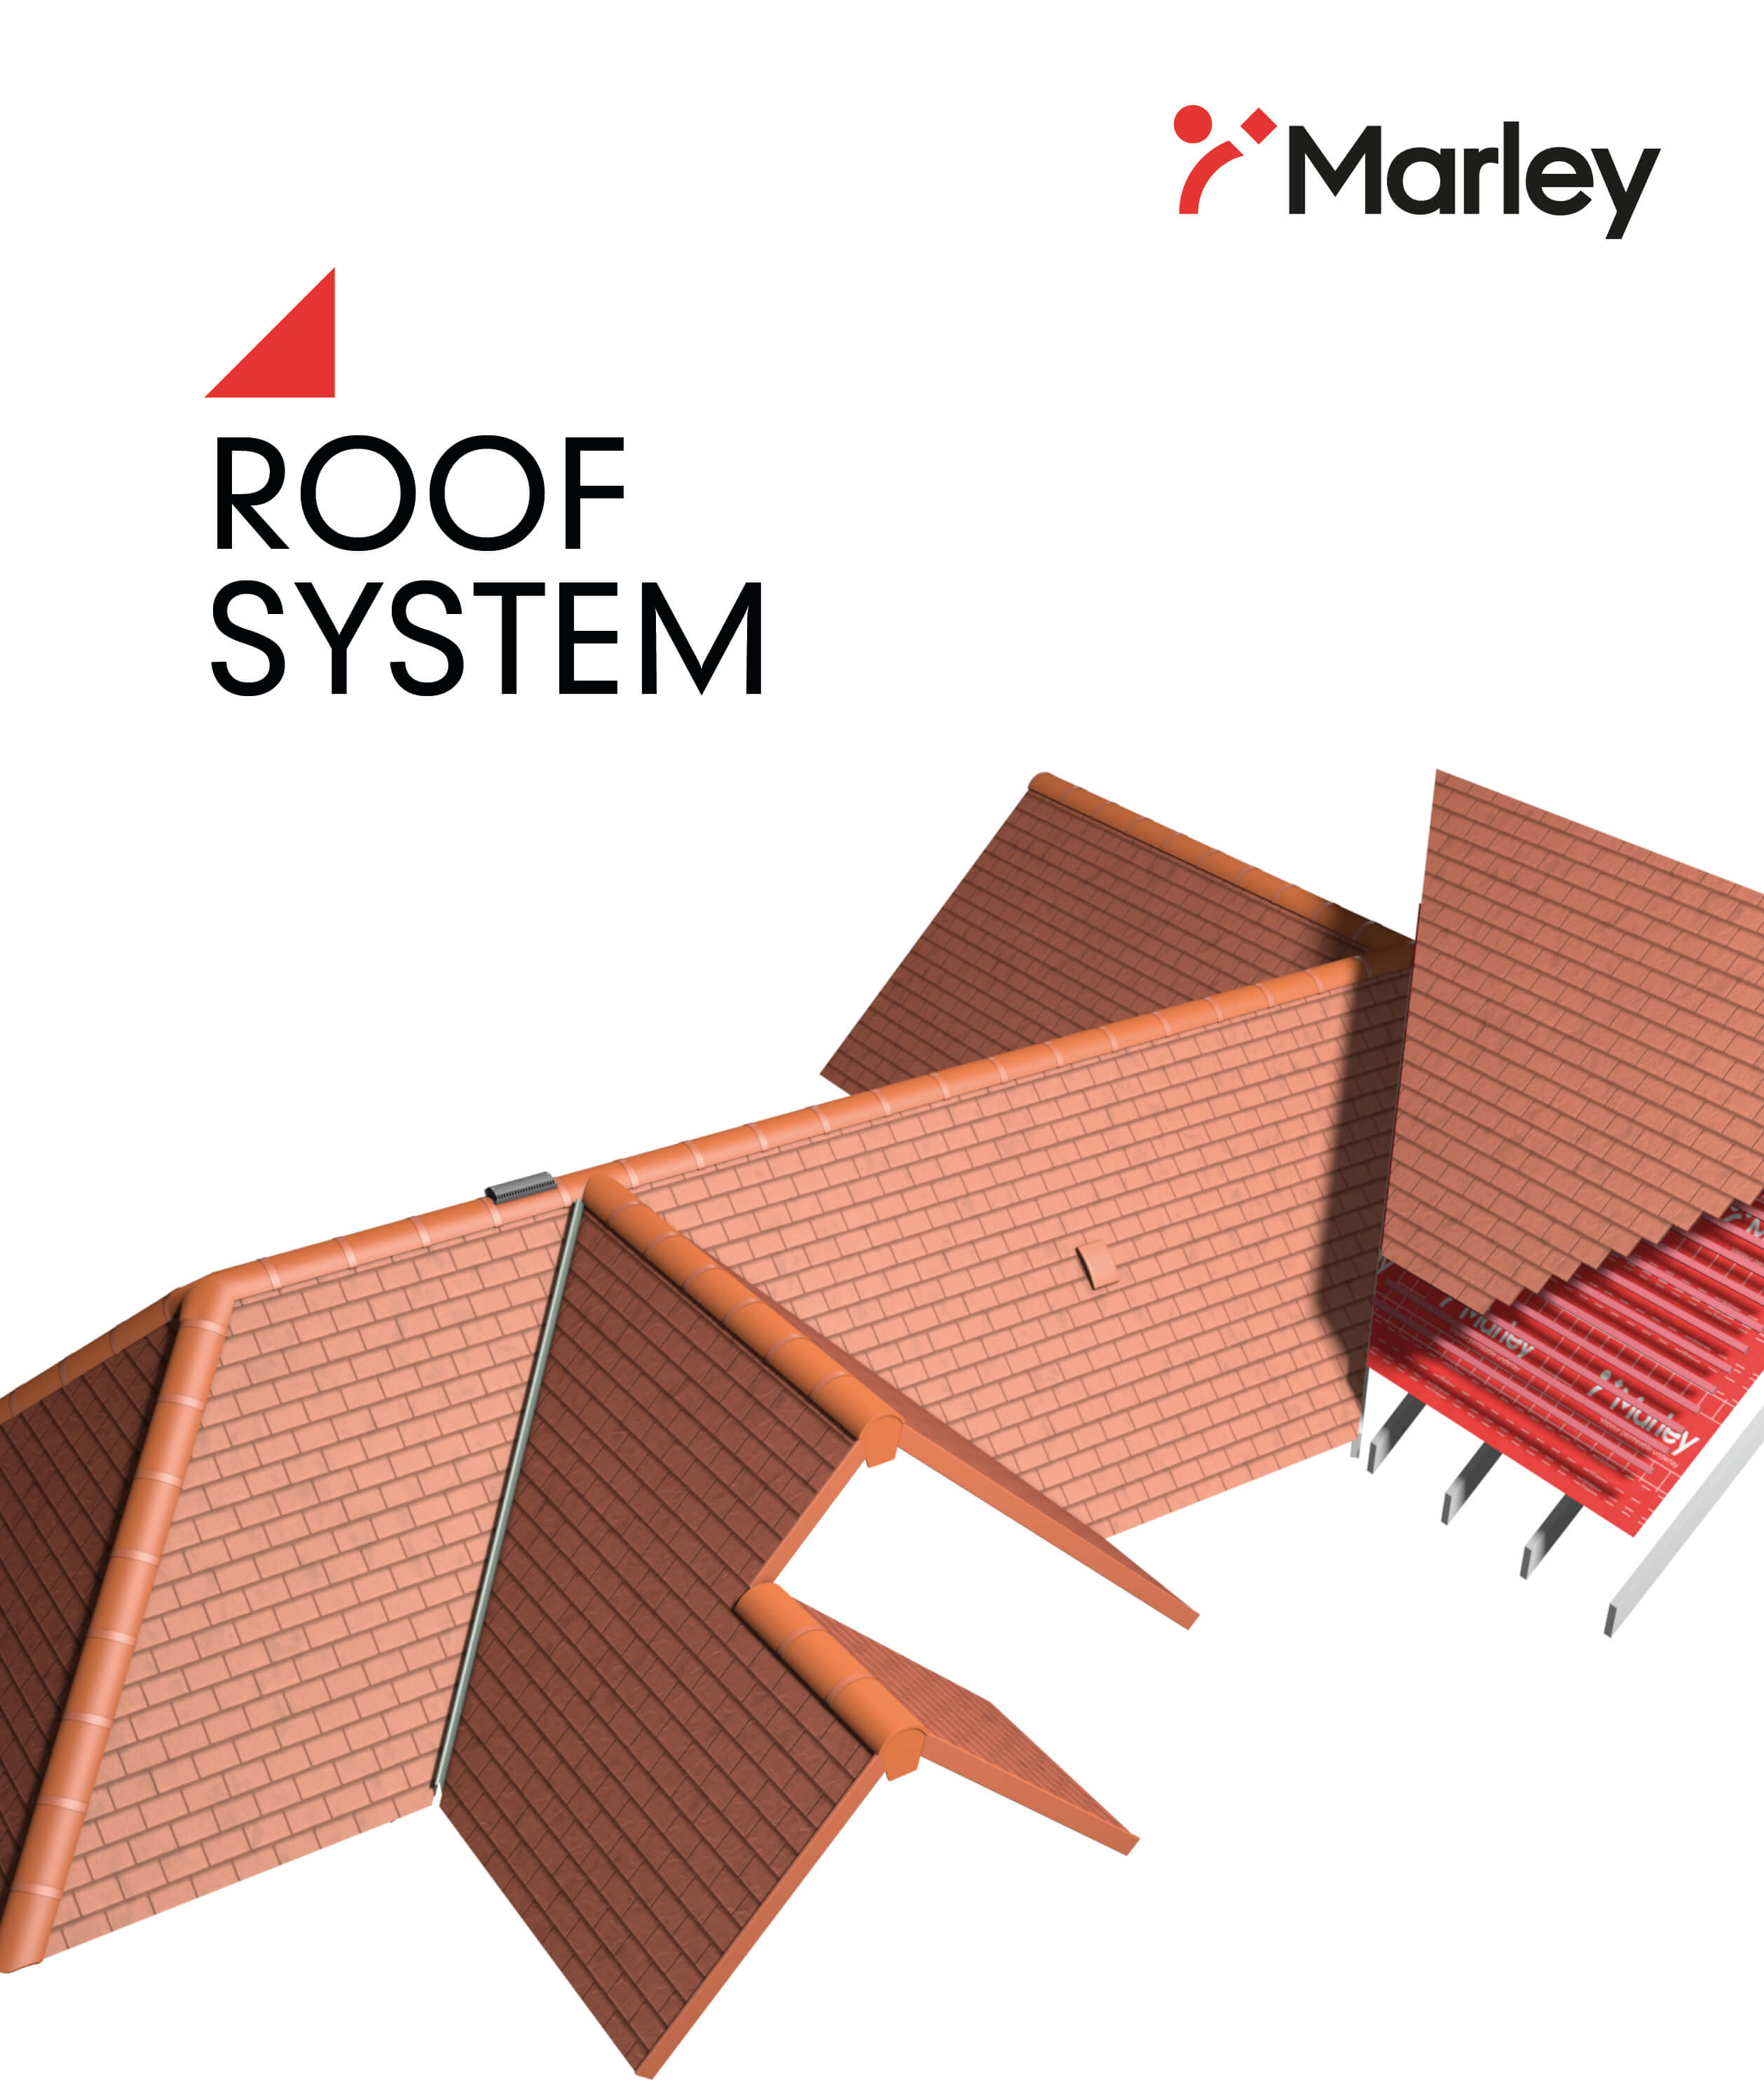 Marley roof system pdf brochure cover